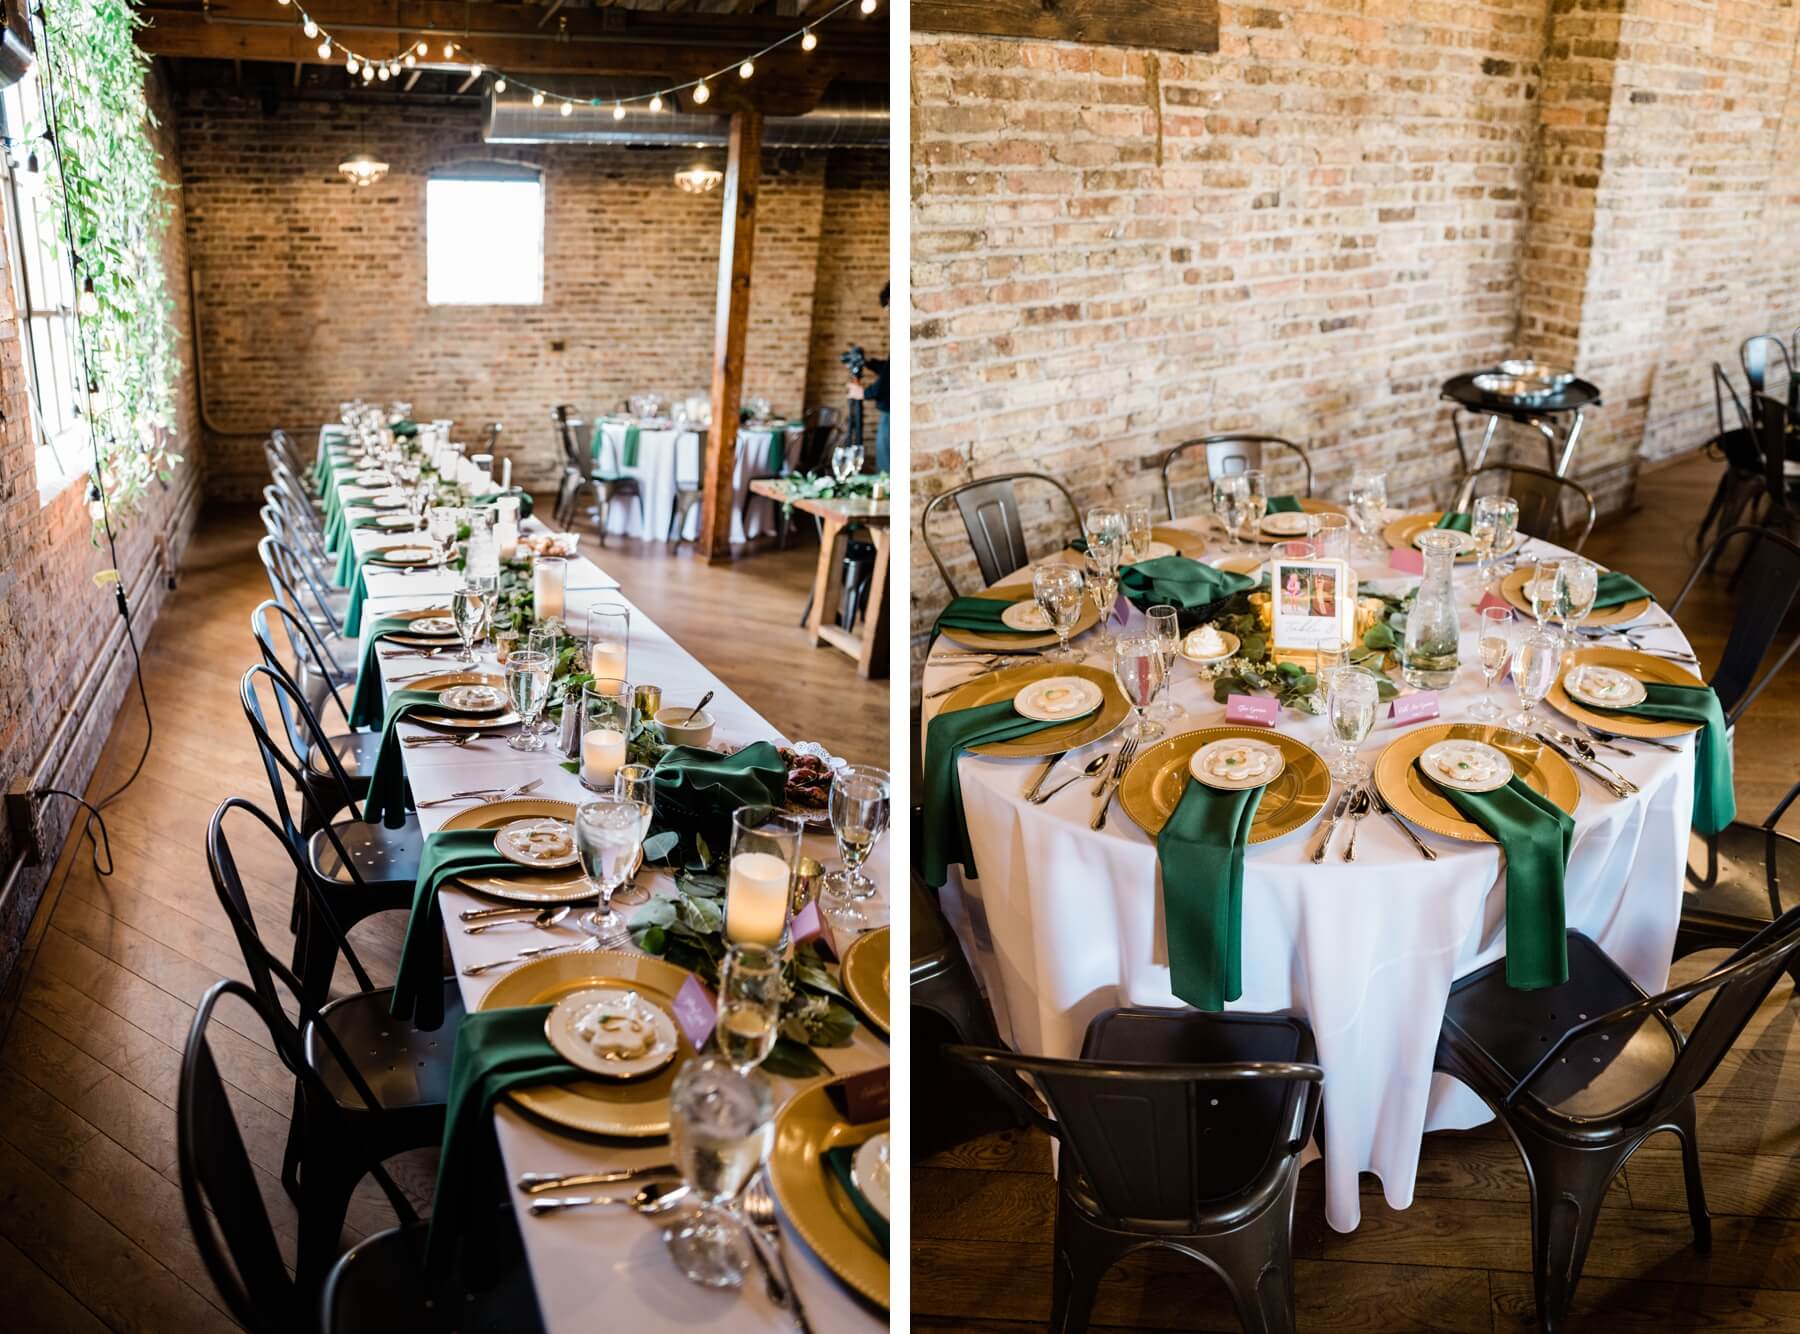 Reception tables with gold chargers, green napkins, and greenery at industrial wedding venue